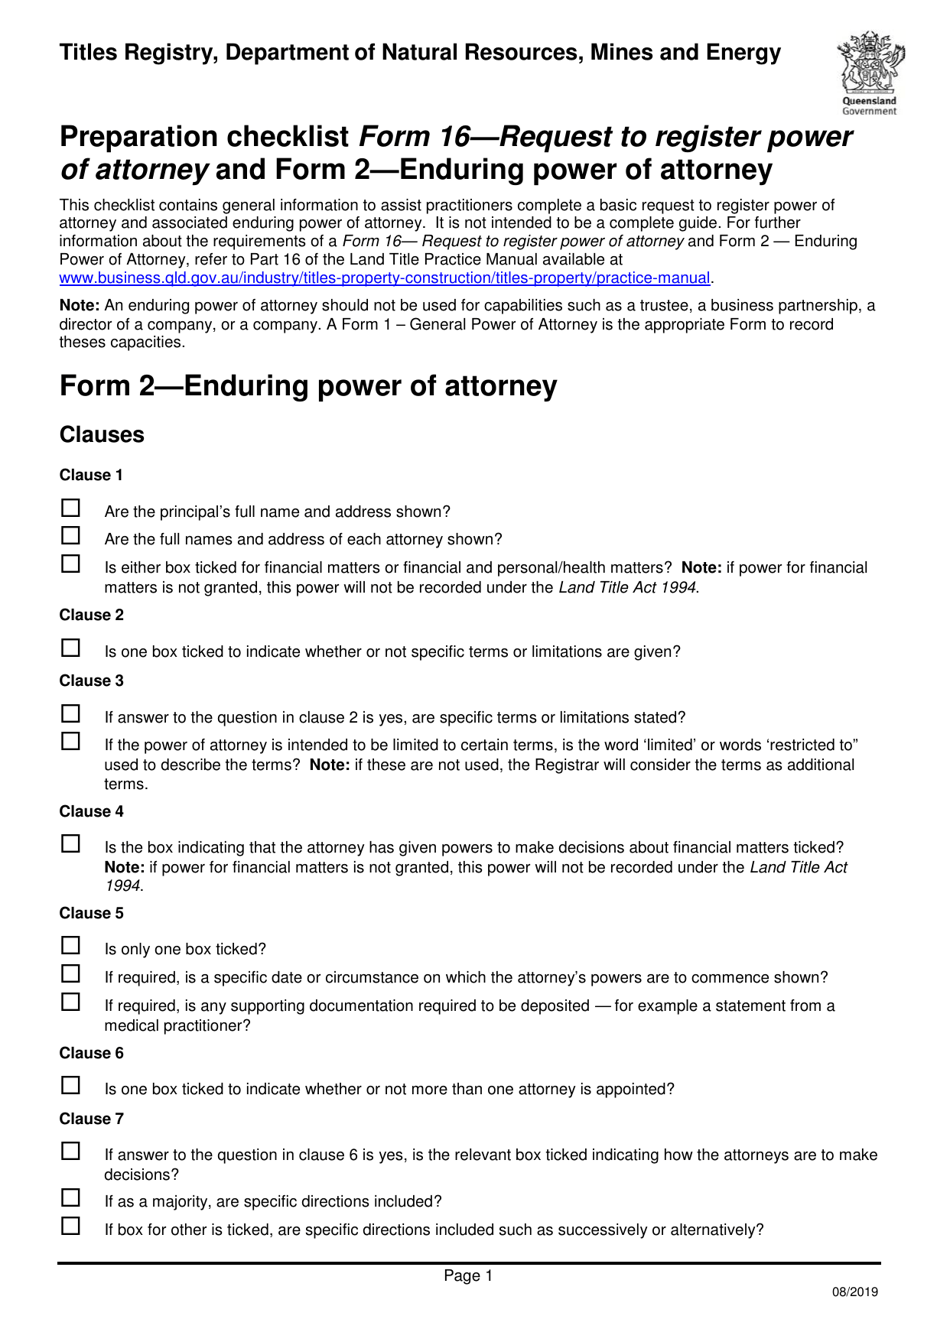 Form 16 (2) Preparation Checklist - Request to Register Power of Attorney and Enduring Power of Attorney - Queensland, Australia, Page 1